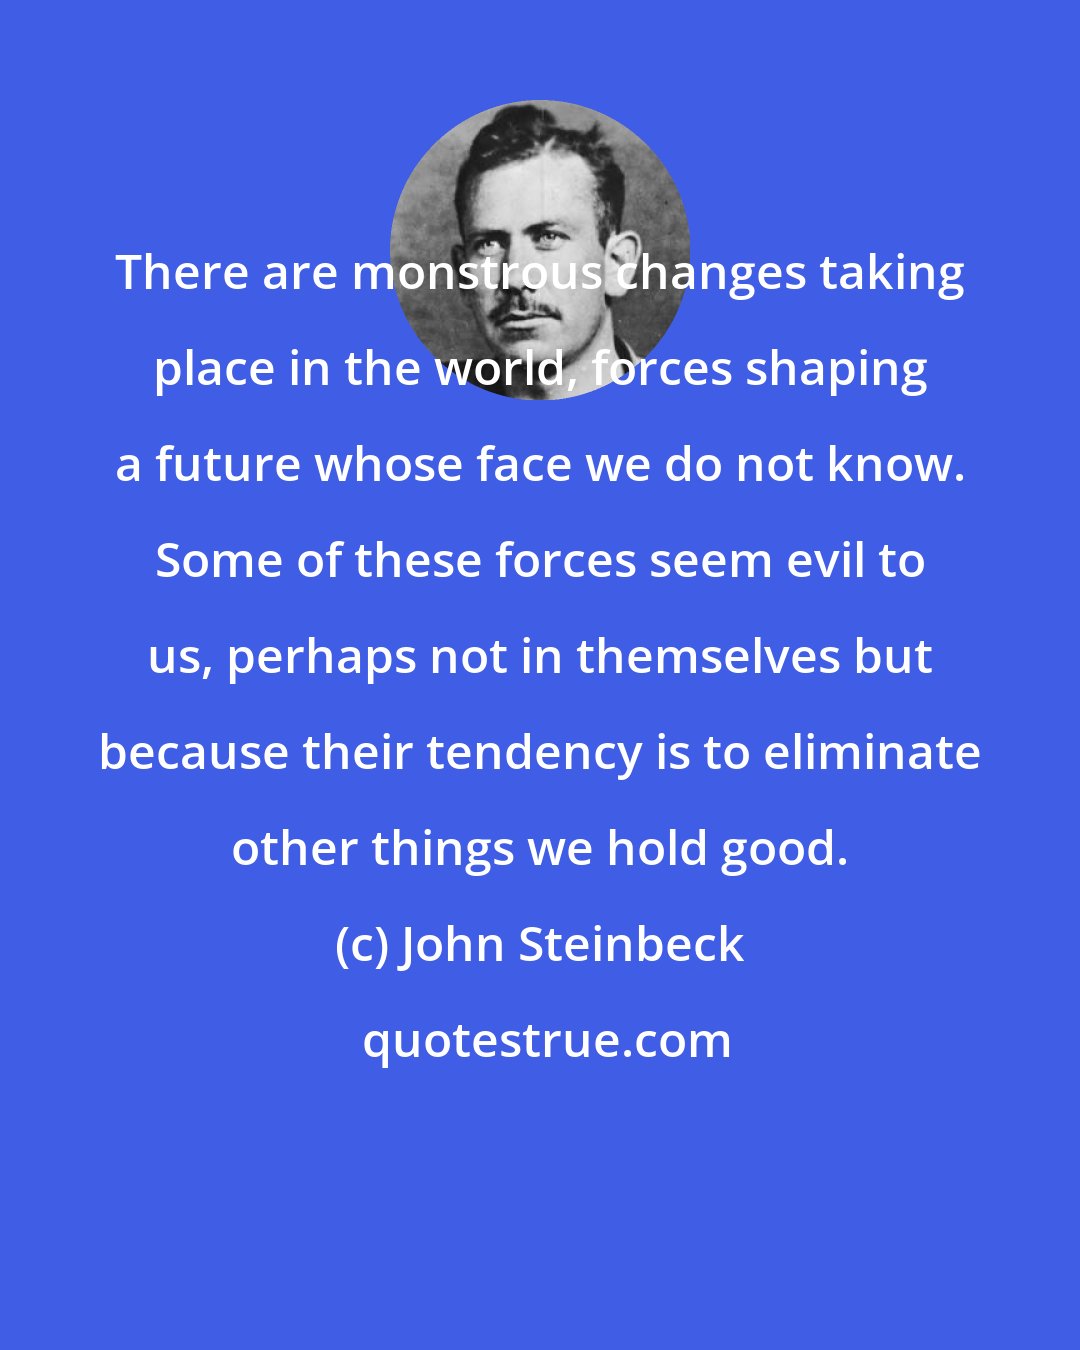 John Steinbeck: There are monstrous changes taking place in the world, forces shaping a future whose face we do not know. Some of these forces seem evil to us, perhaps not in themselves but because their tendency is to eliminate other things we hold good.